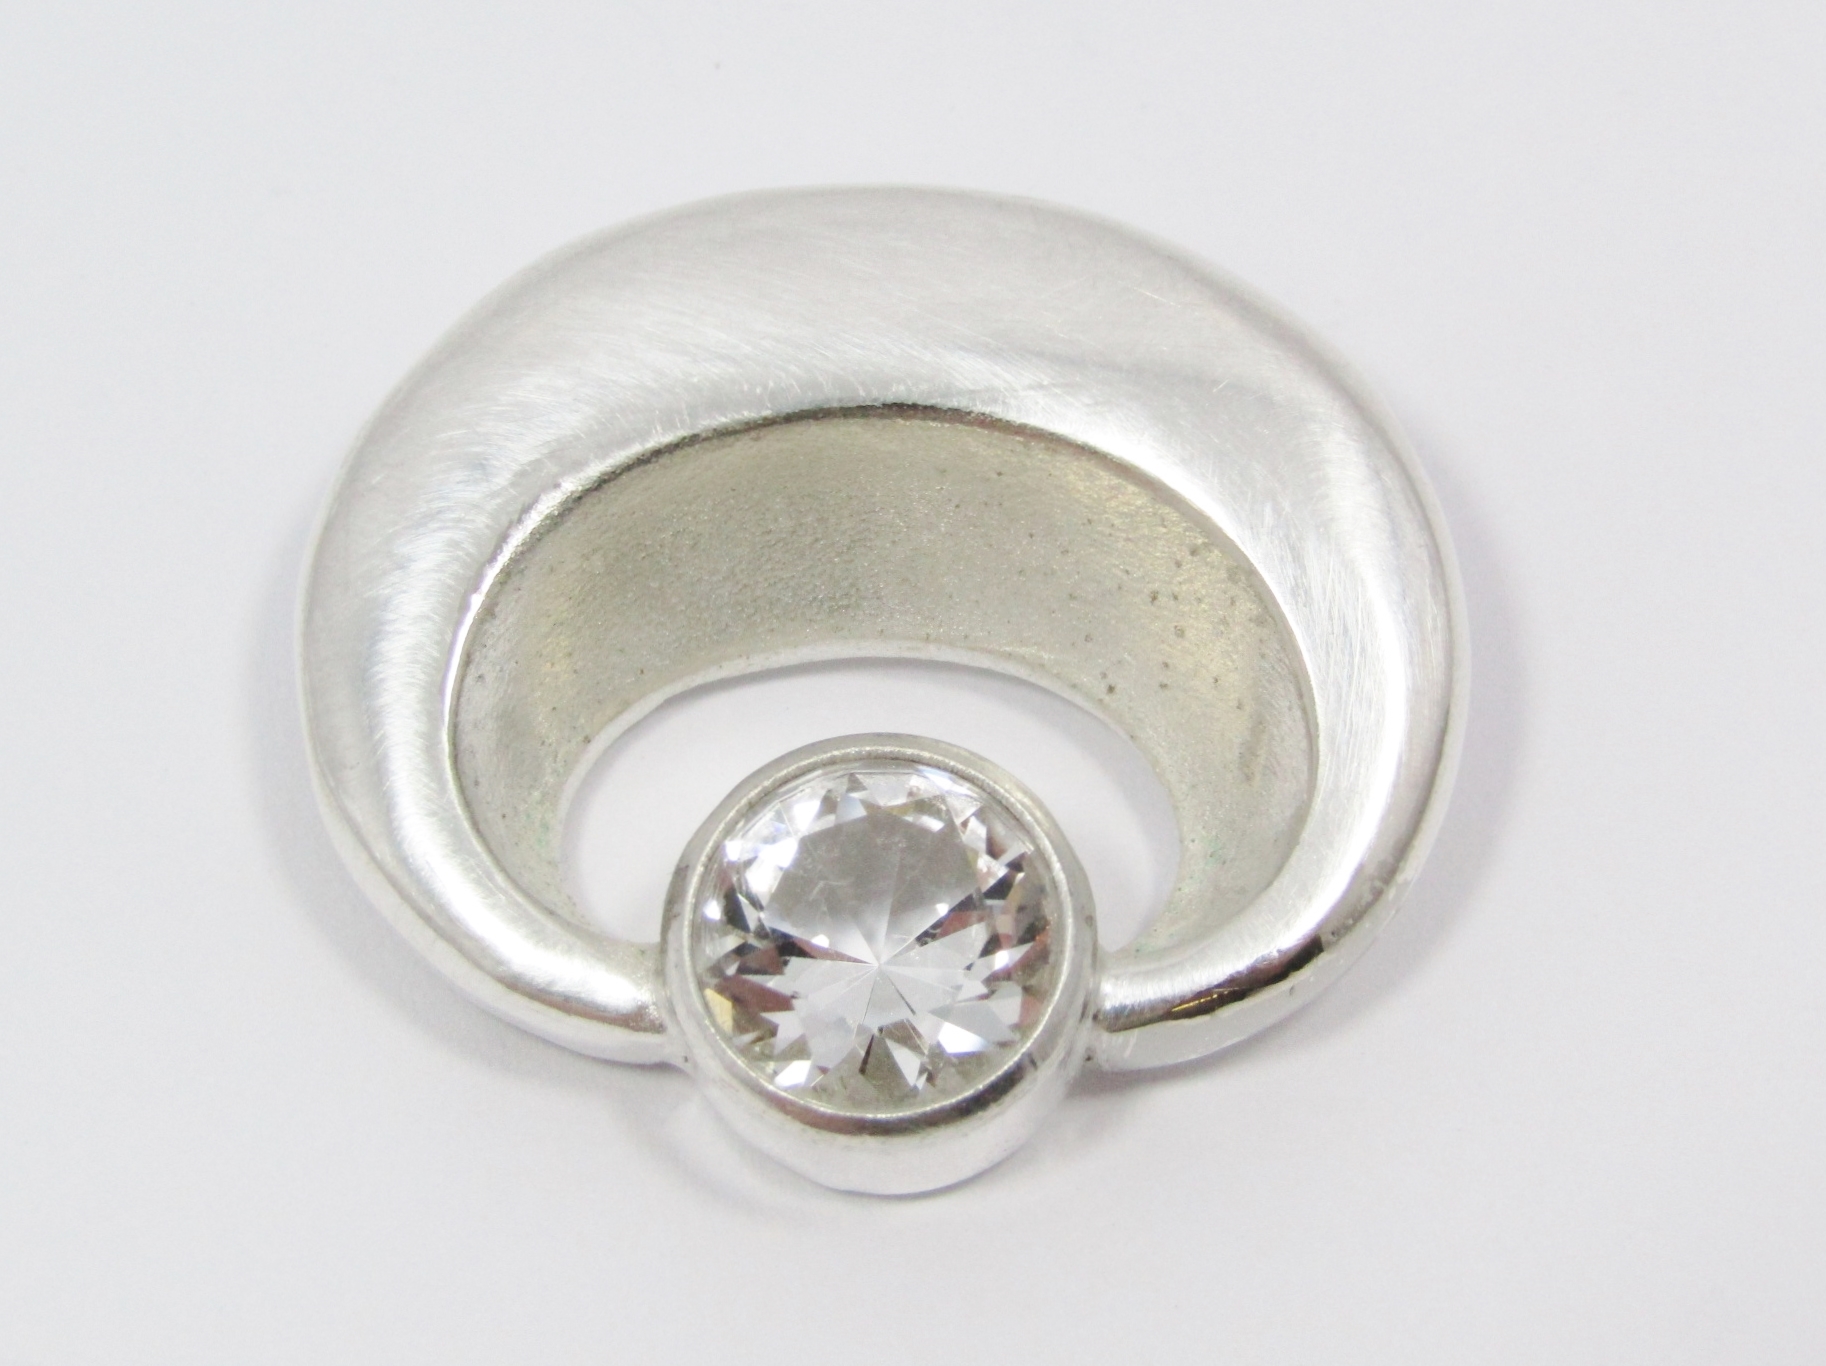 A Lovely Solid Modernist Style Brooch With a Rock Crystal in Silver.